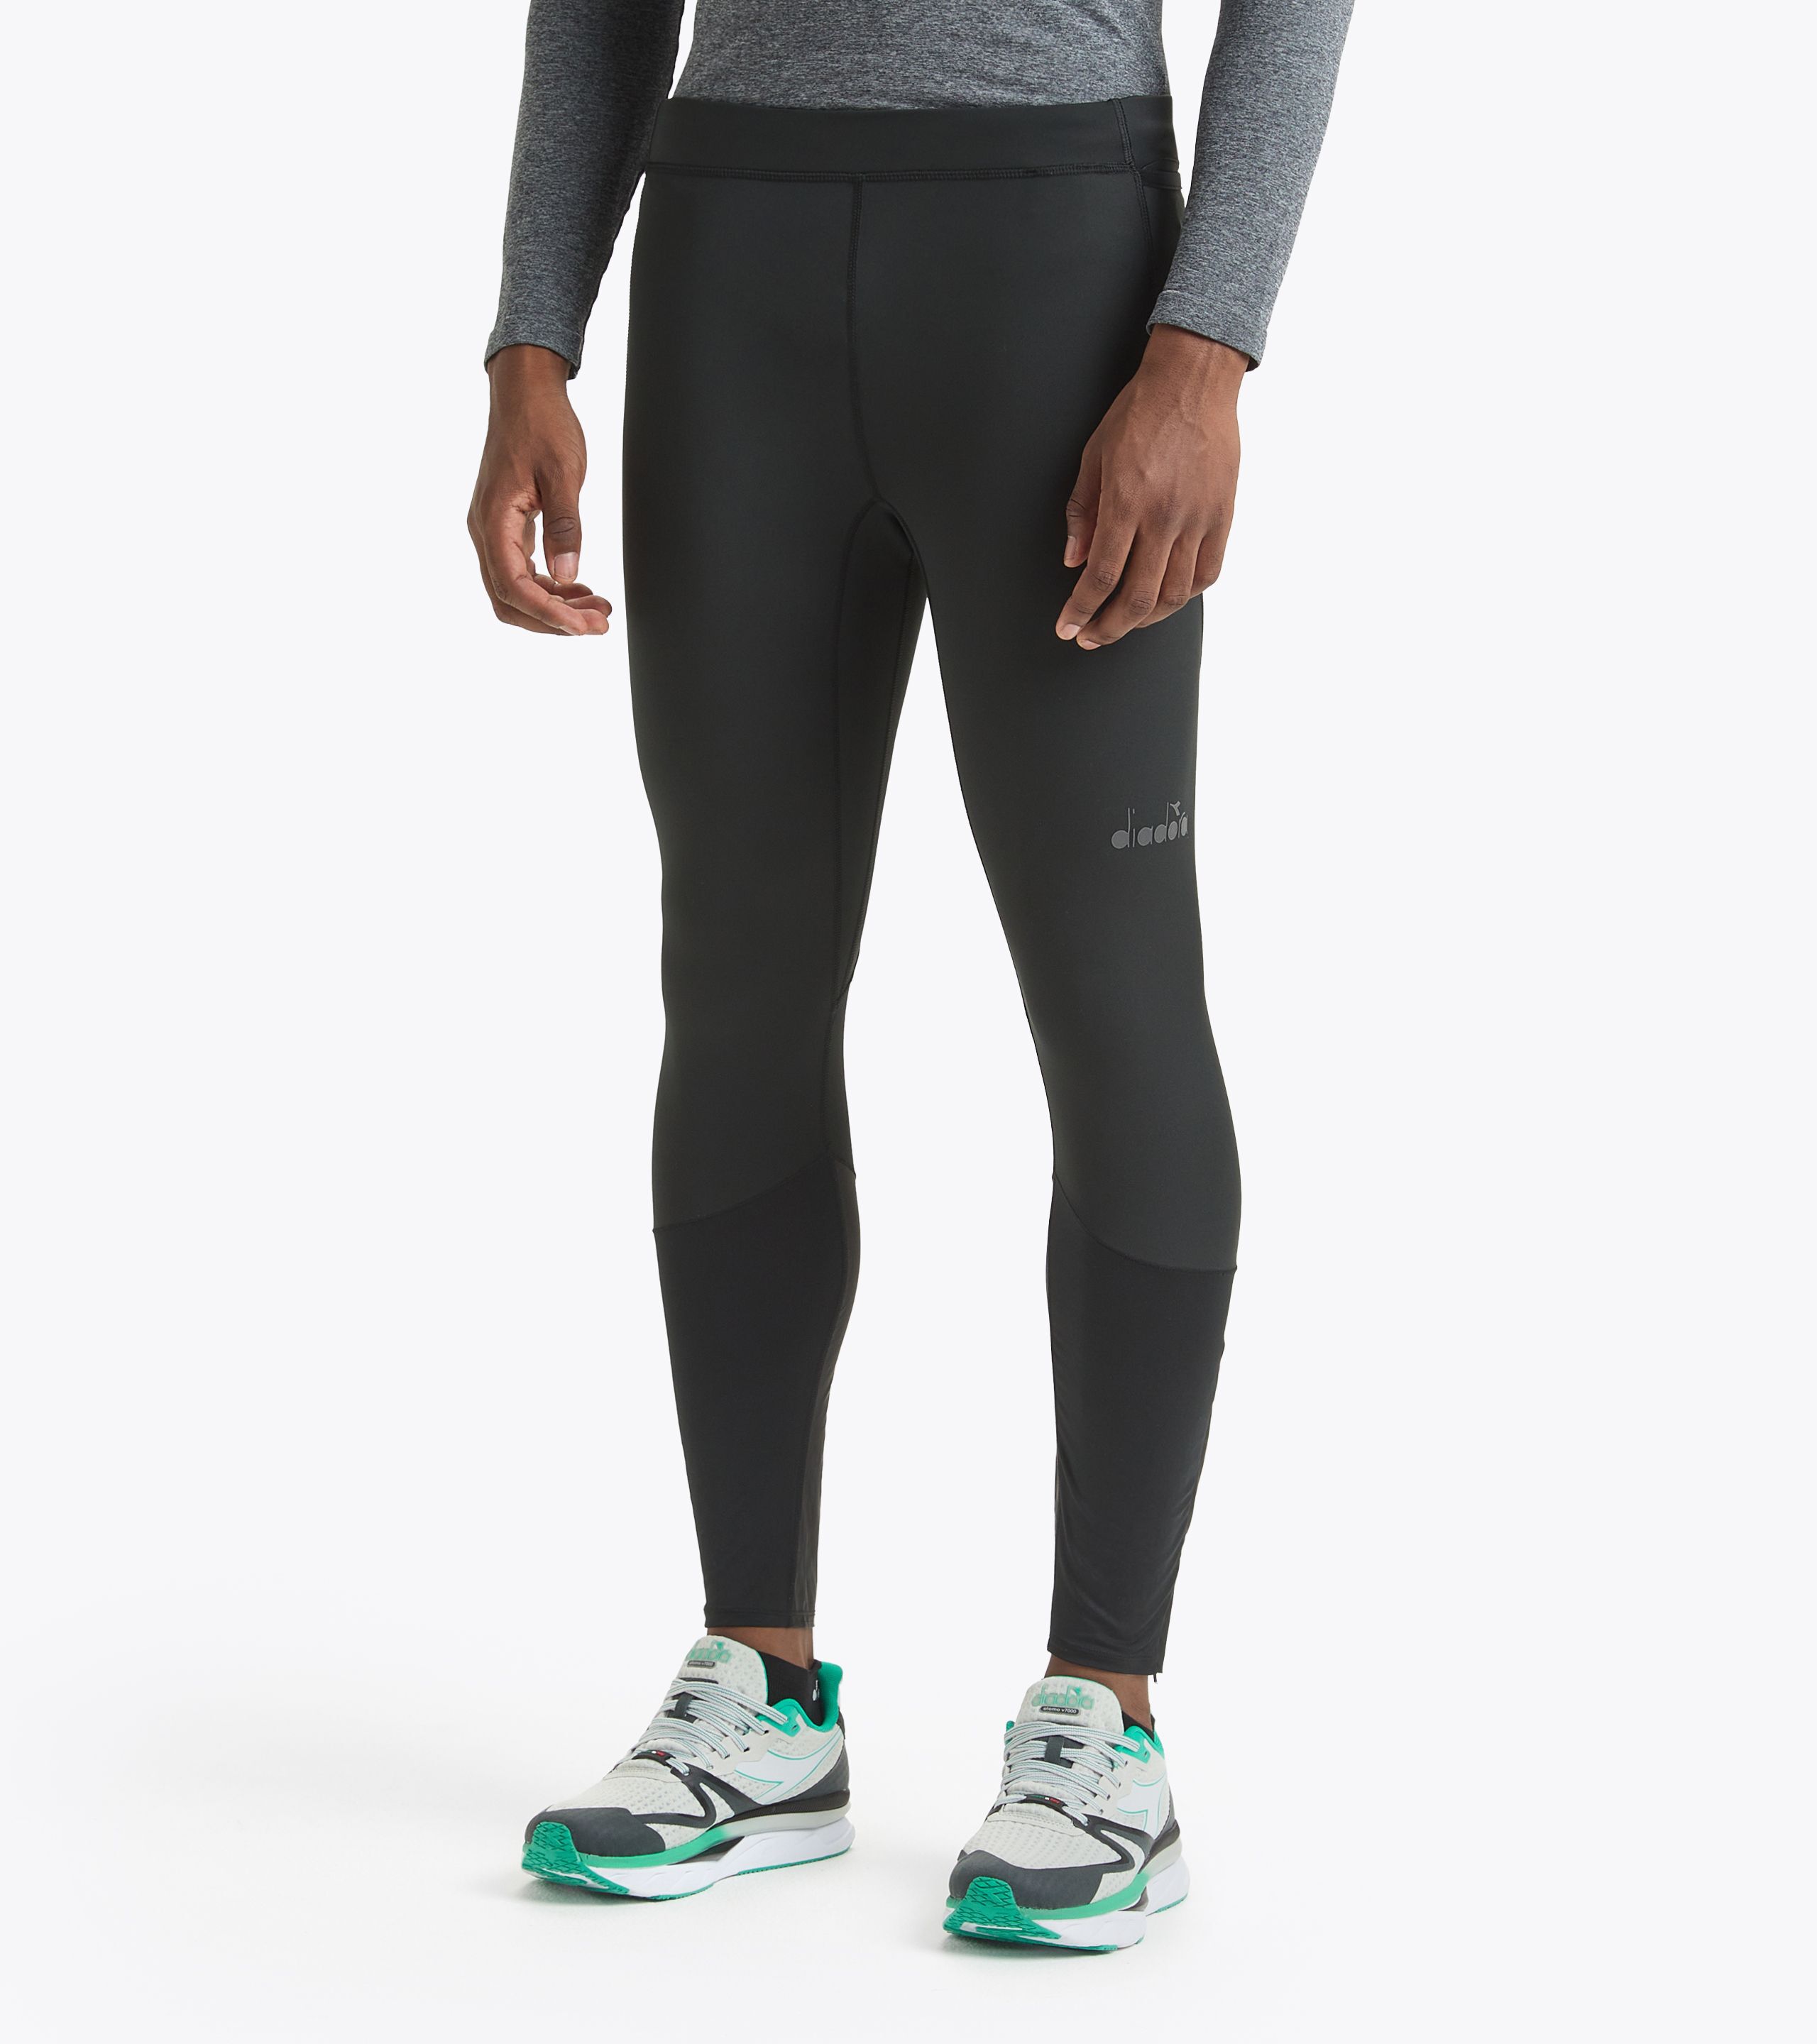 Compression Mens Running And Gym Decathlon Leggings For Training And  Jogging 221116 From Qiyuan05, $23.67 | DHgate.Com